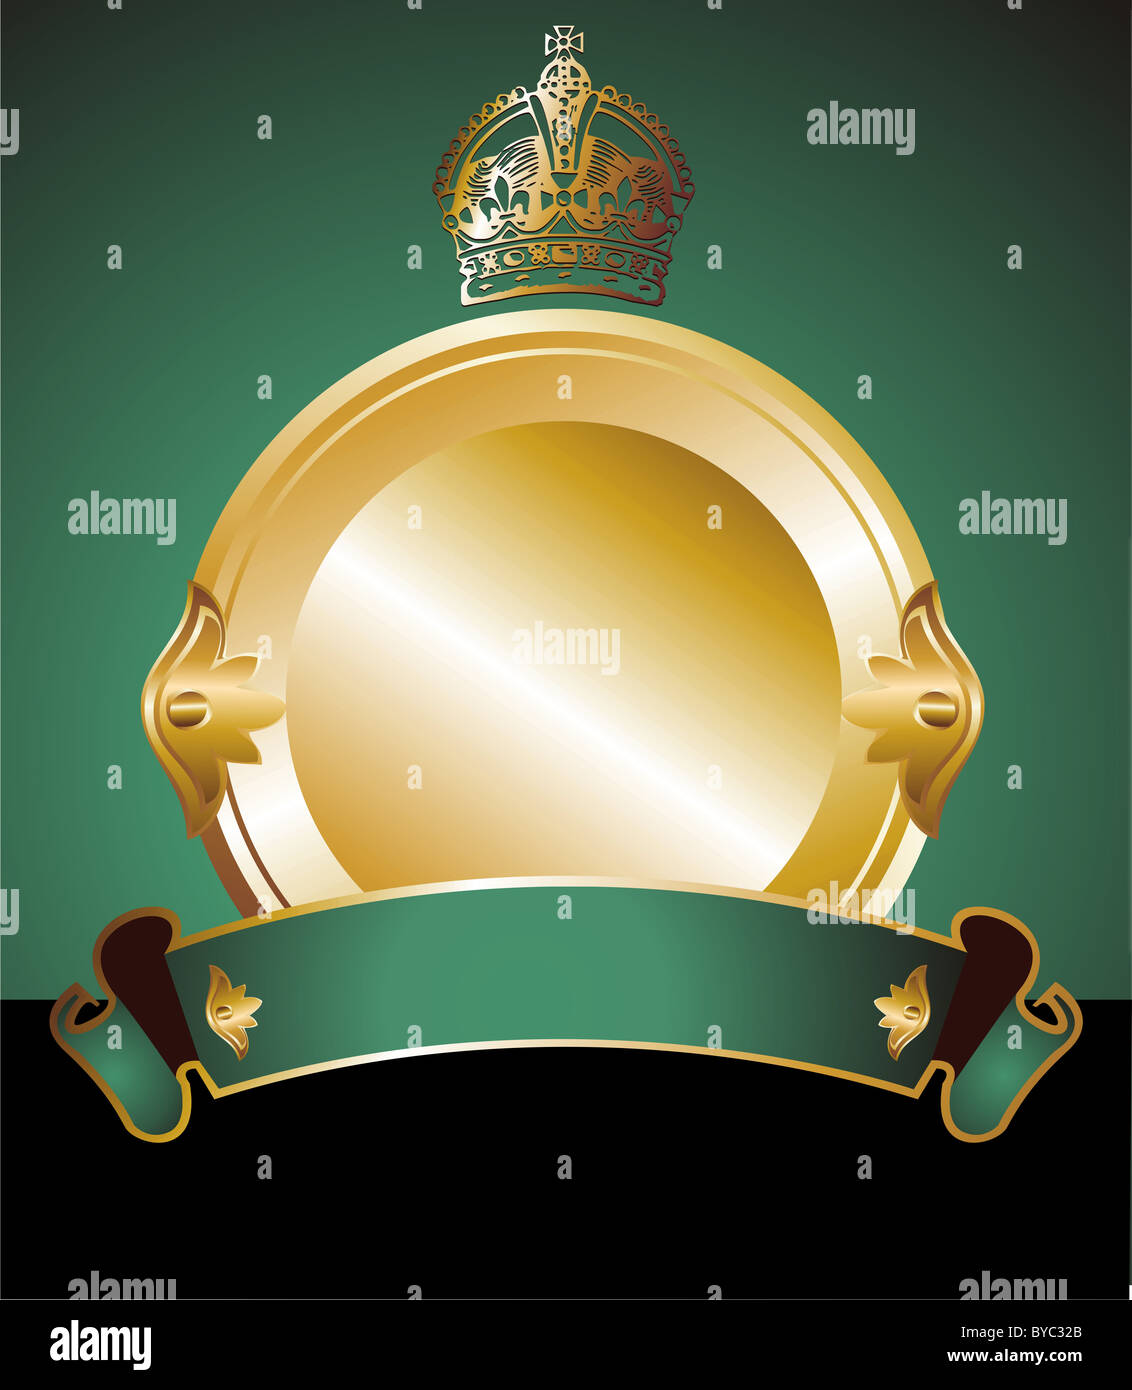 Round golden label with crown and winged band on green background Stock Photo